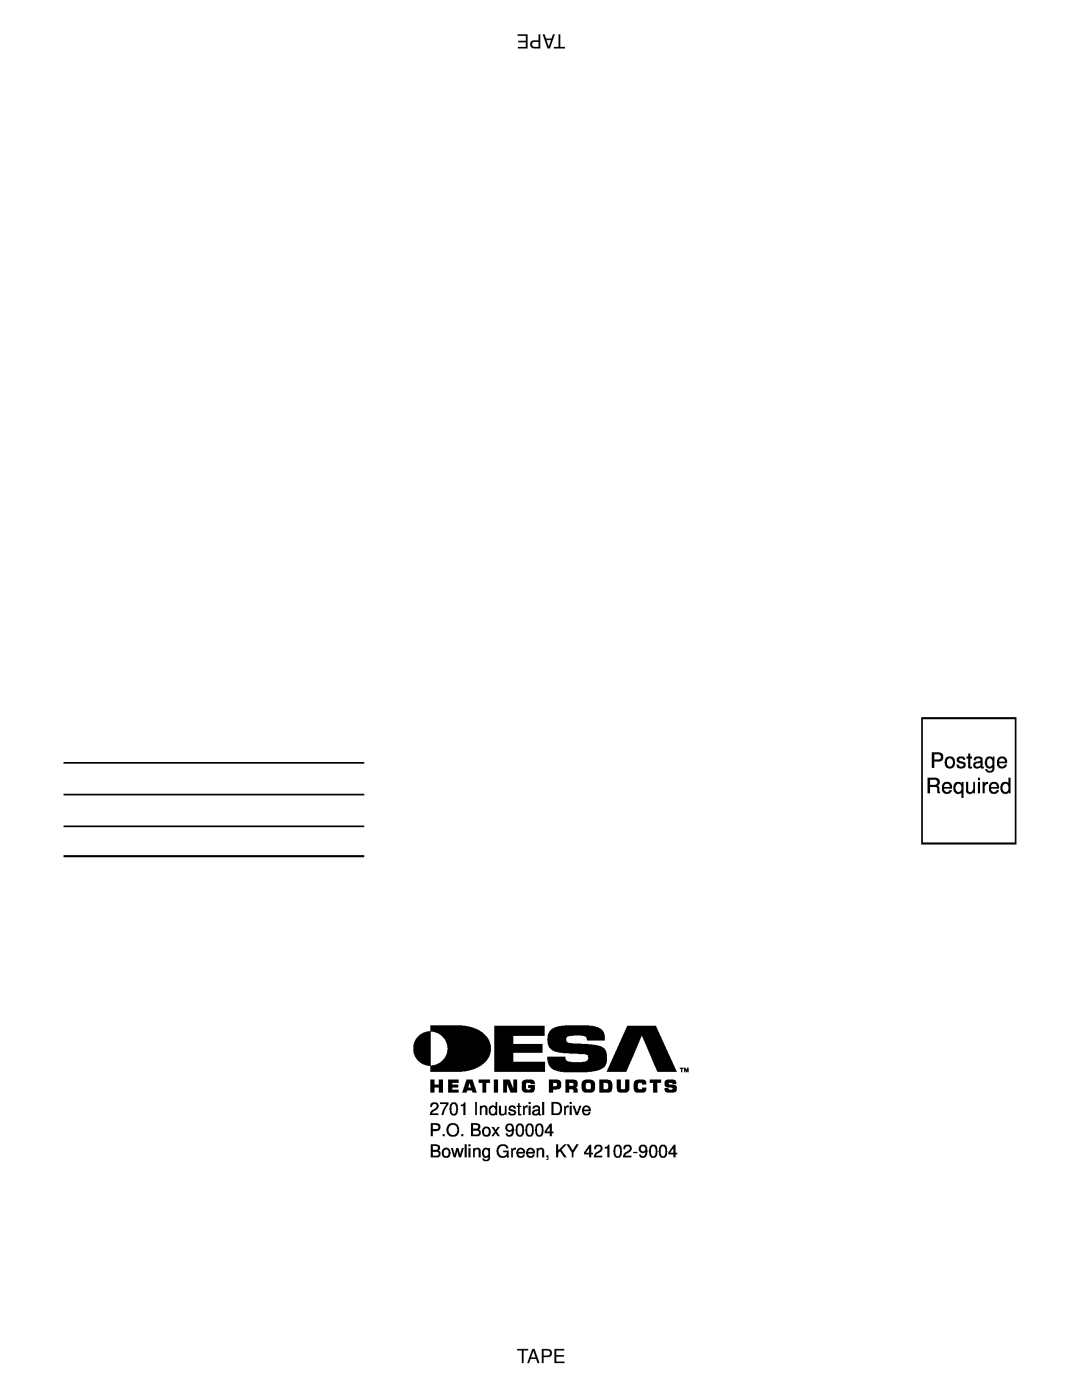 Desa LDL3924PR, LDL3930PR, LDL3930NR installation manual Postage Required, Tape, Industrial Drive P.O. Box Bowling Green, KY 